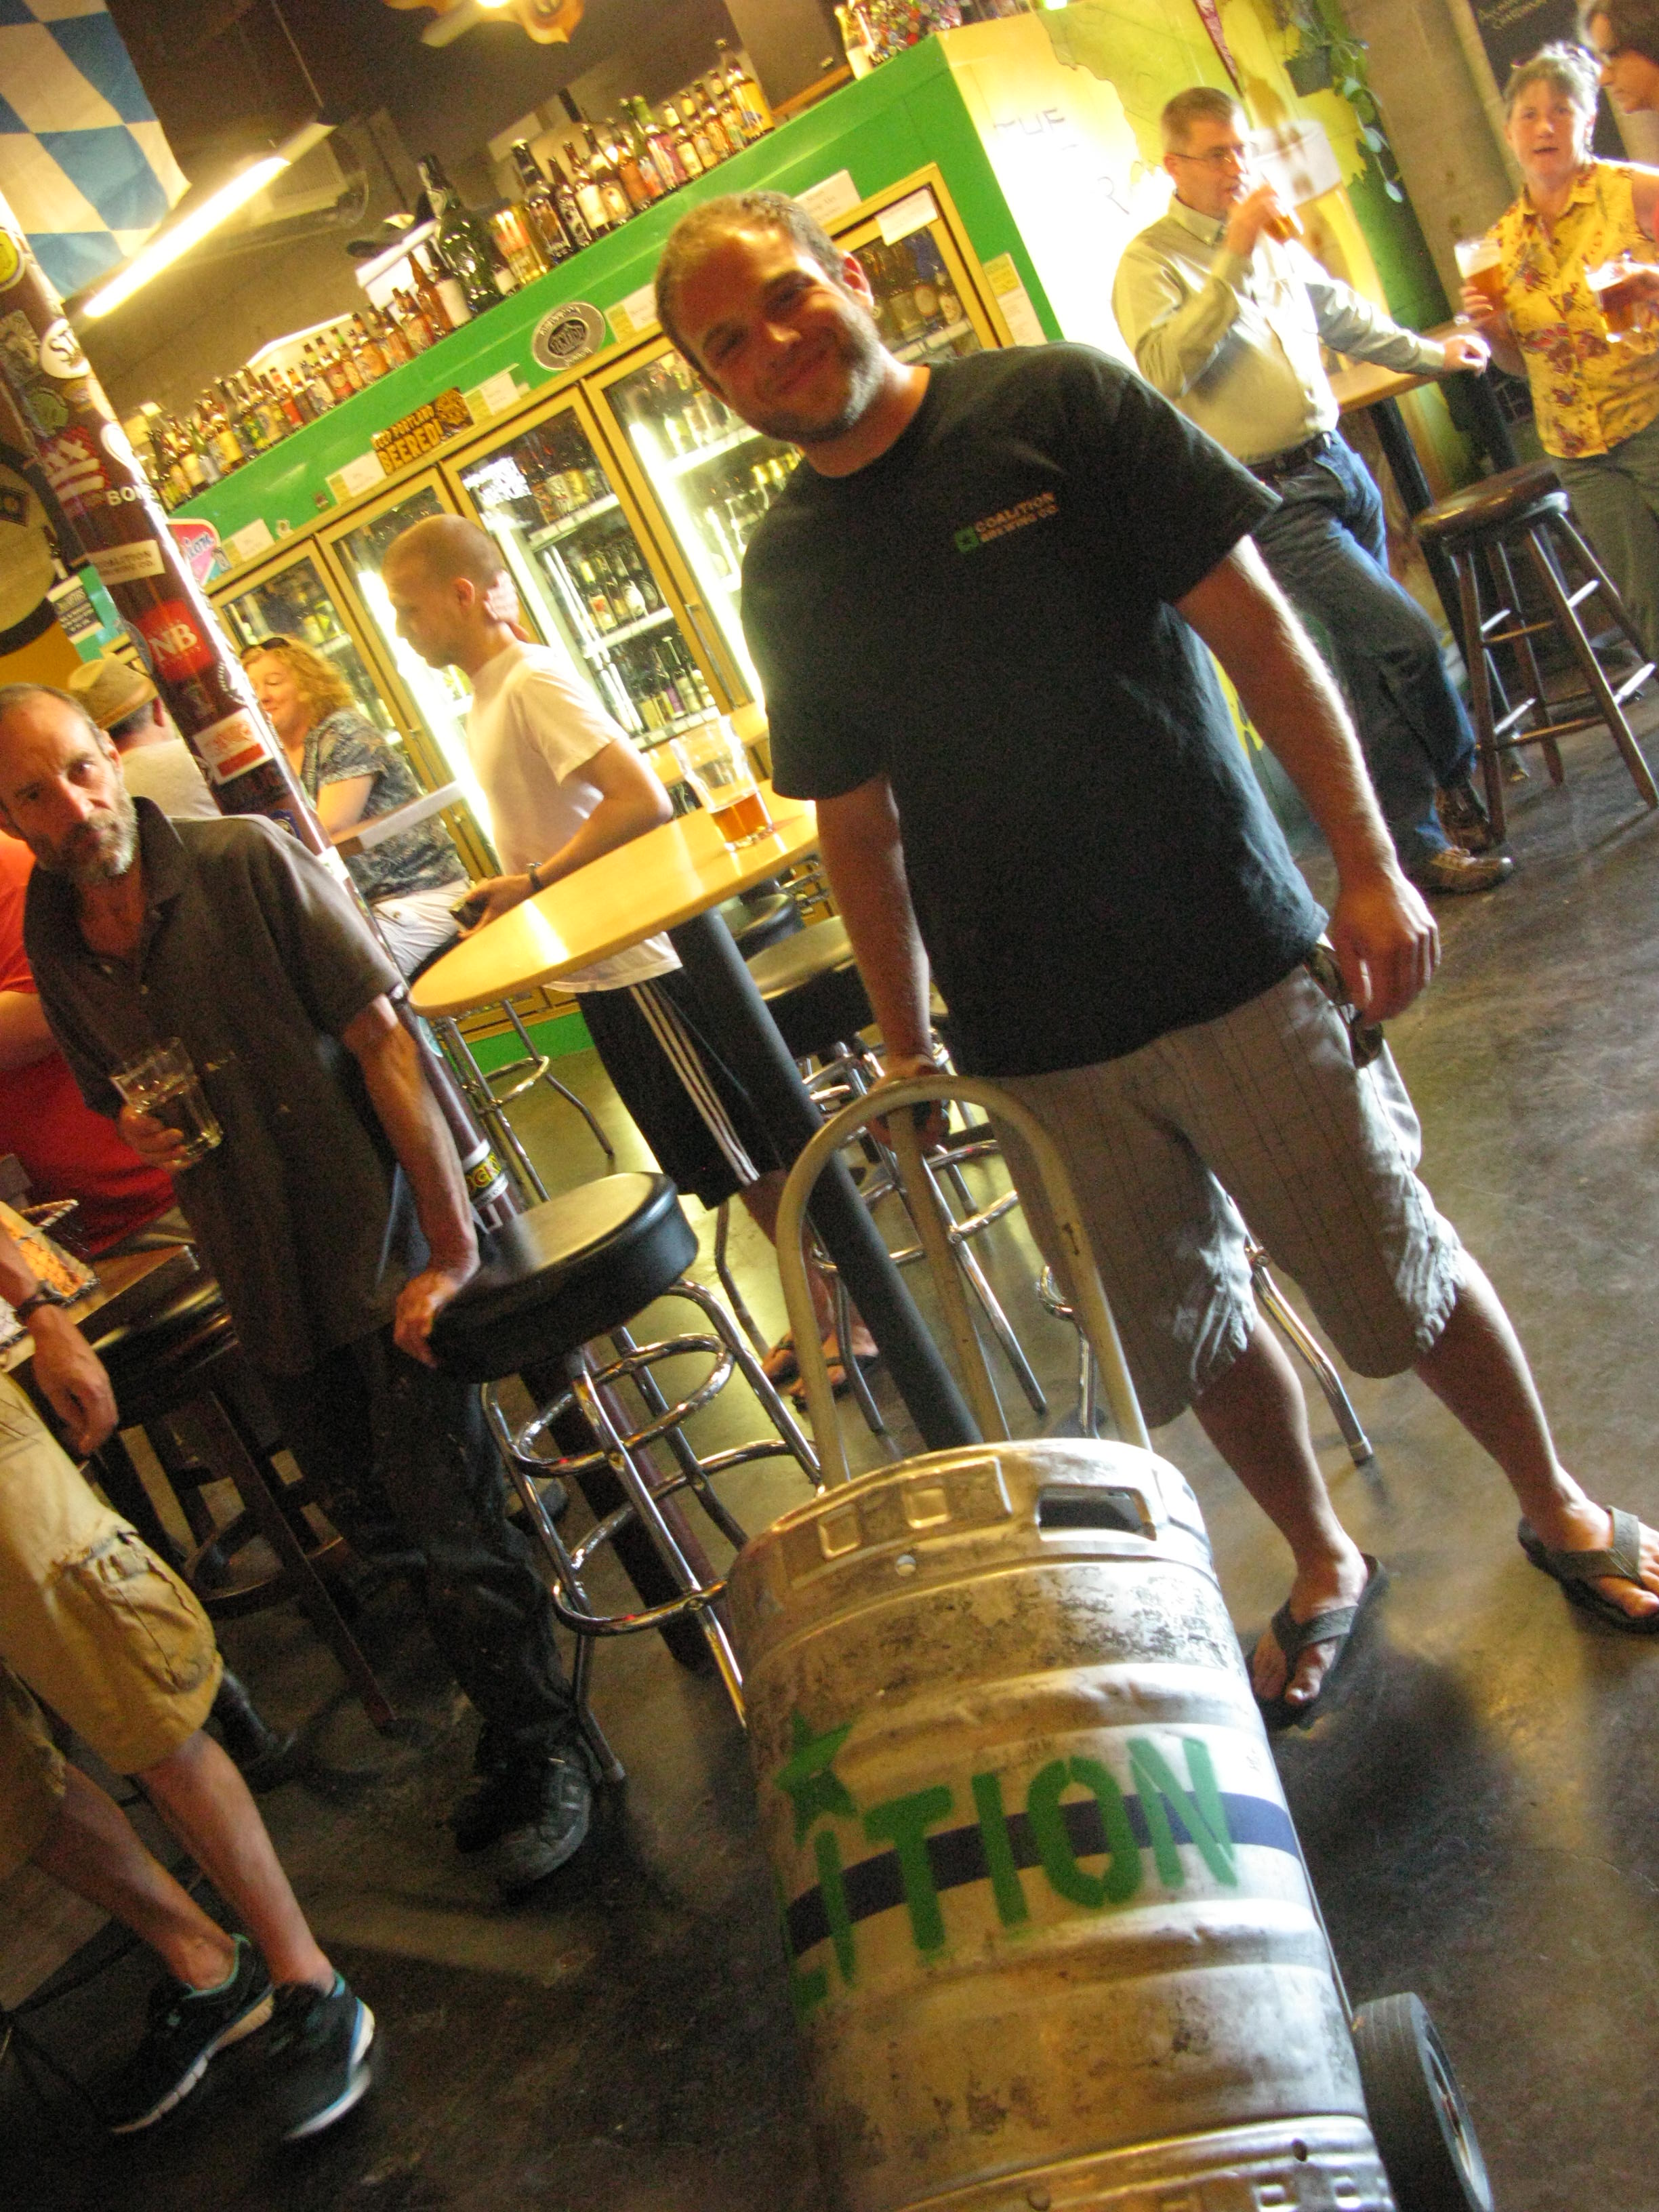 Elan from Coalition Brewing moving a keg at The BeerMongers (FoystonFoto)